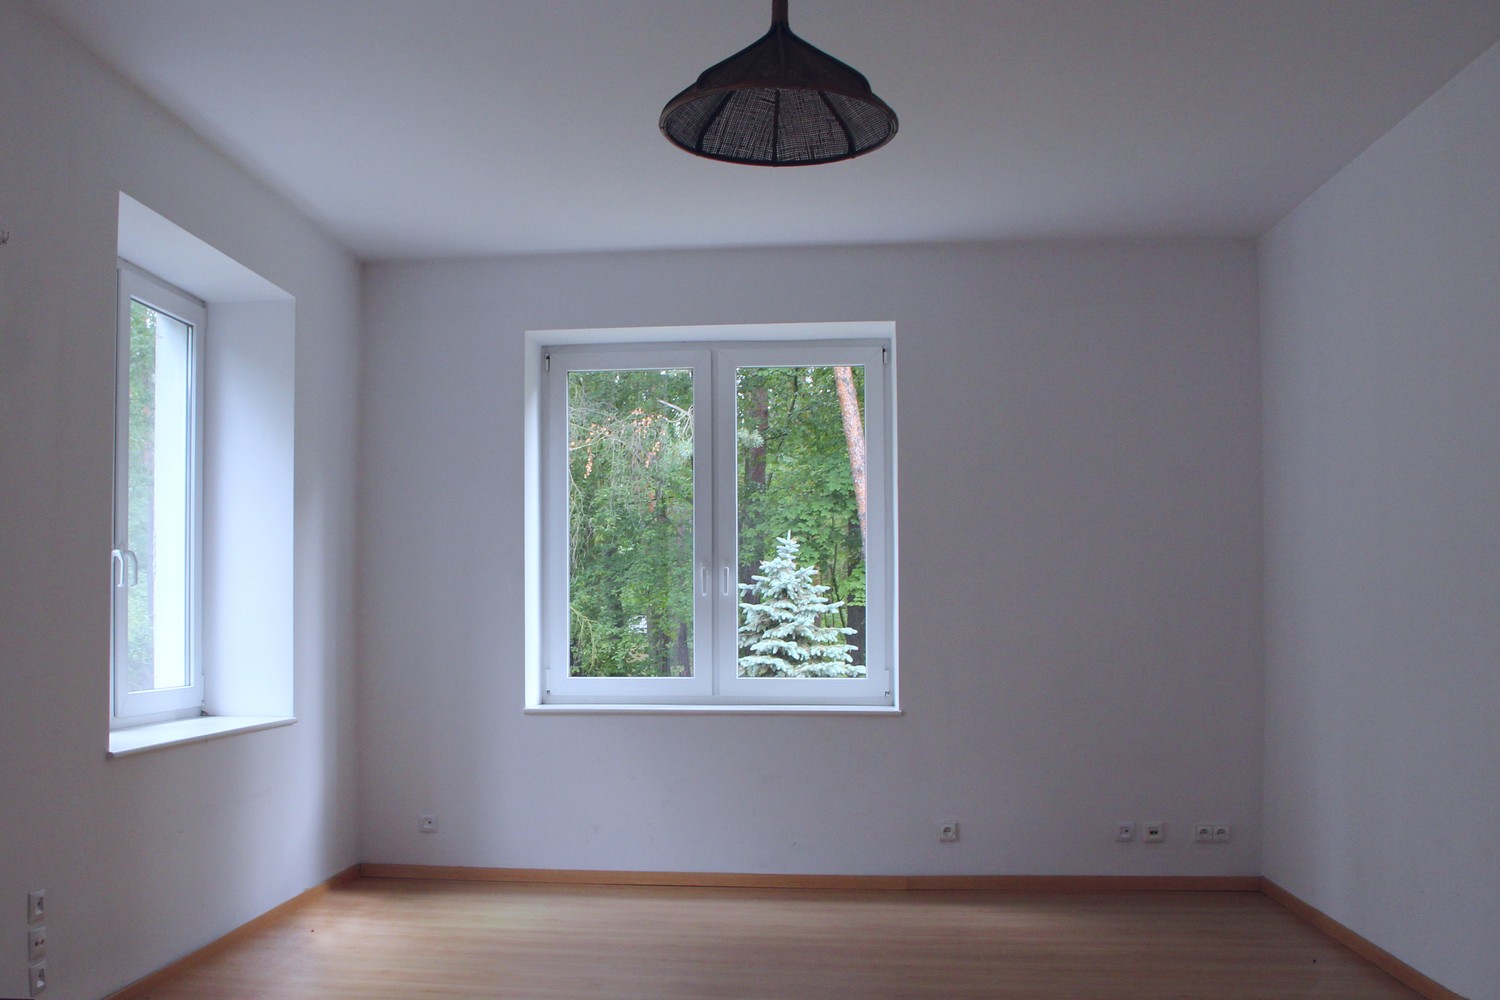 Empty clear room with window overlooking forest. Window overlooking forest. Room in country house with forest view